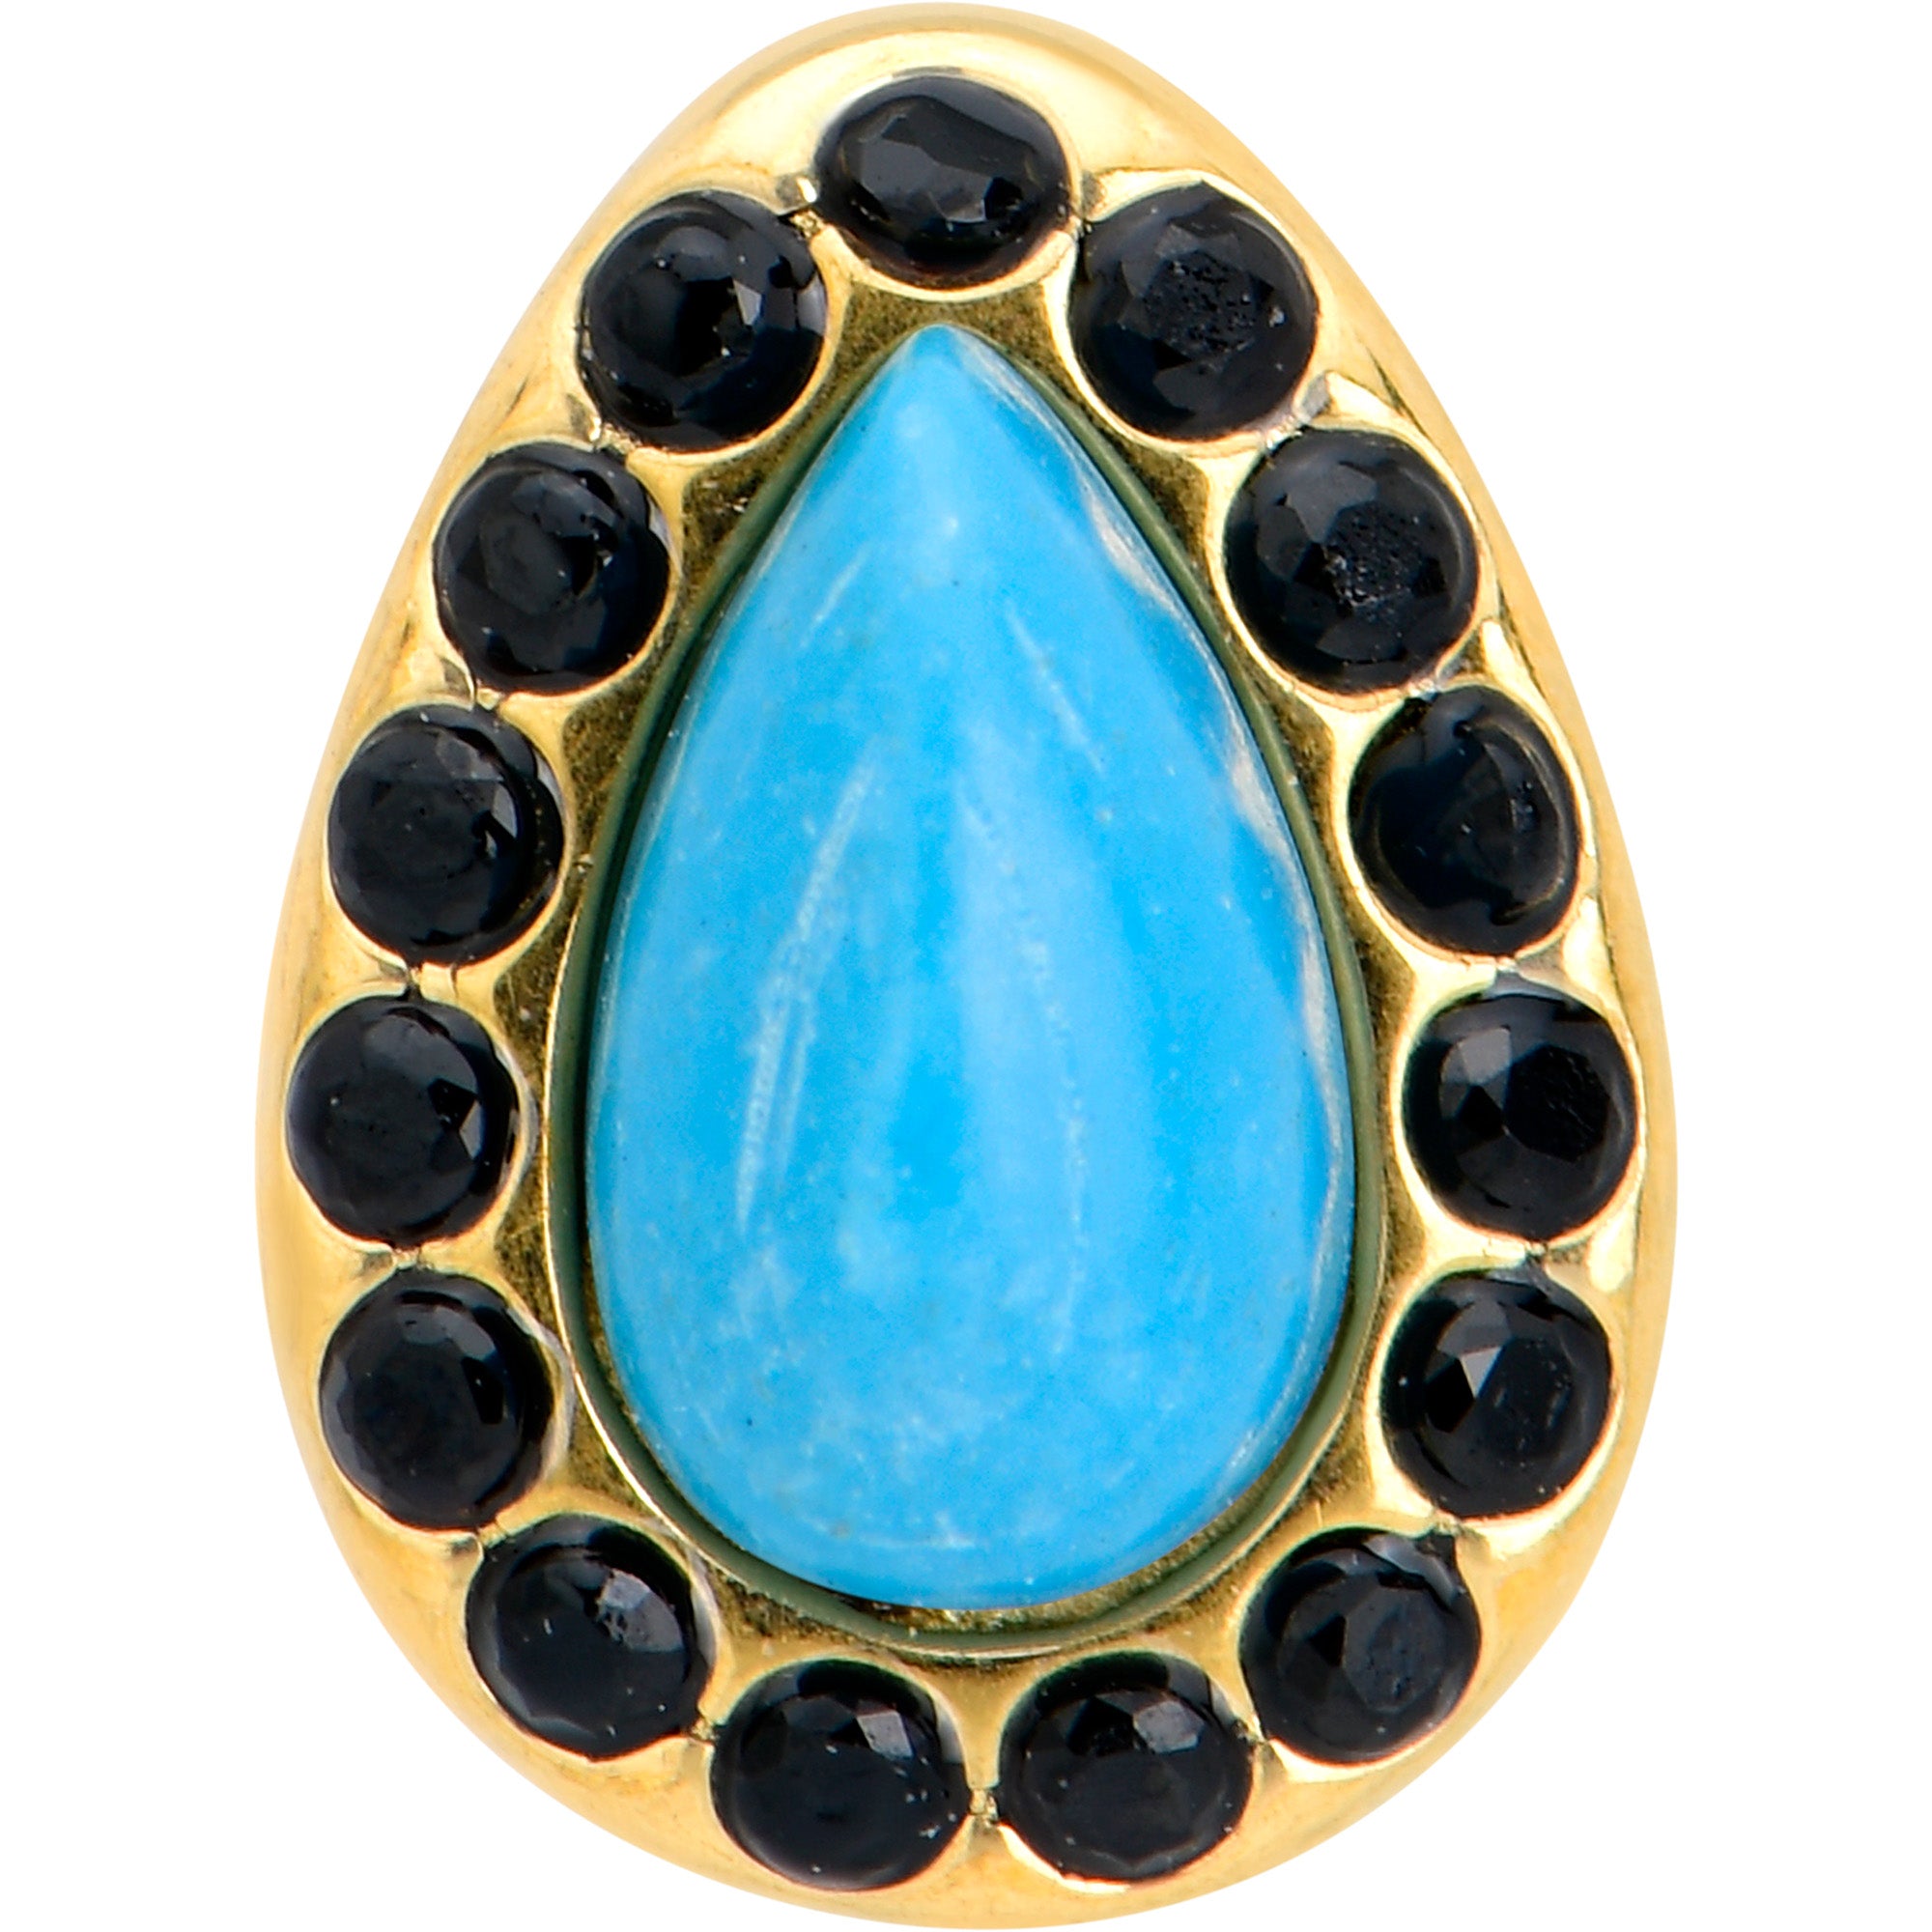 Gold Tone Southwestern Style Blue Drop Barbell Tongue Ring